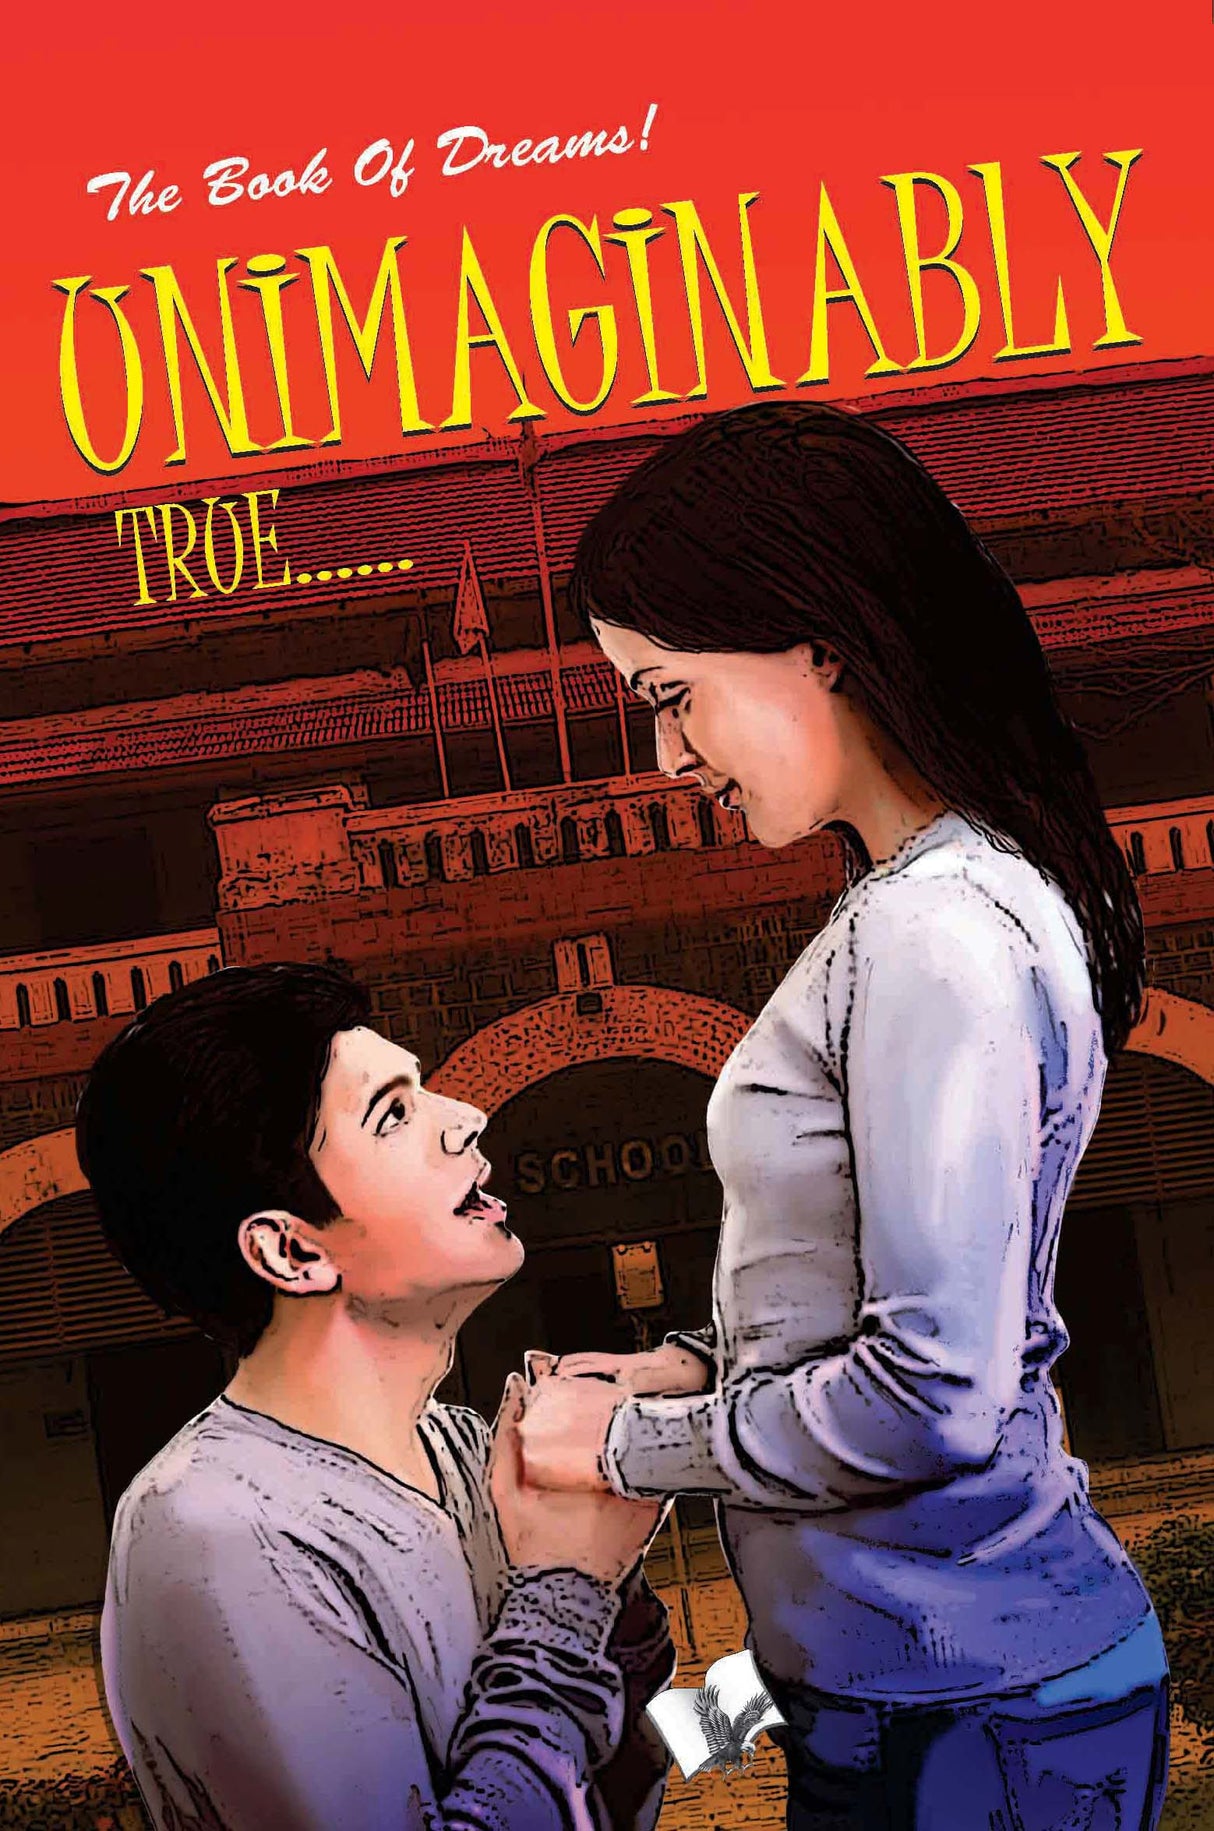 Unimaginably True: A romantic novel on youthful relationship for your adults